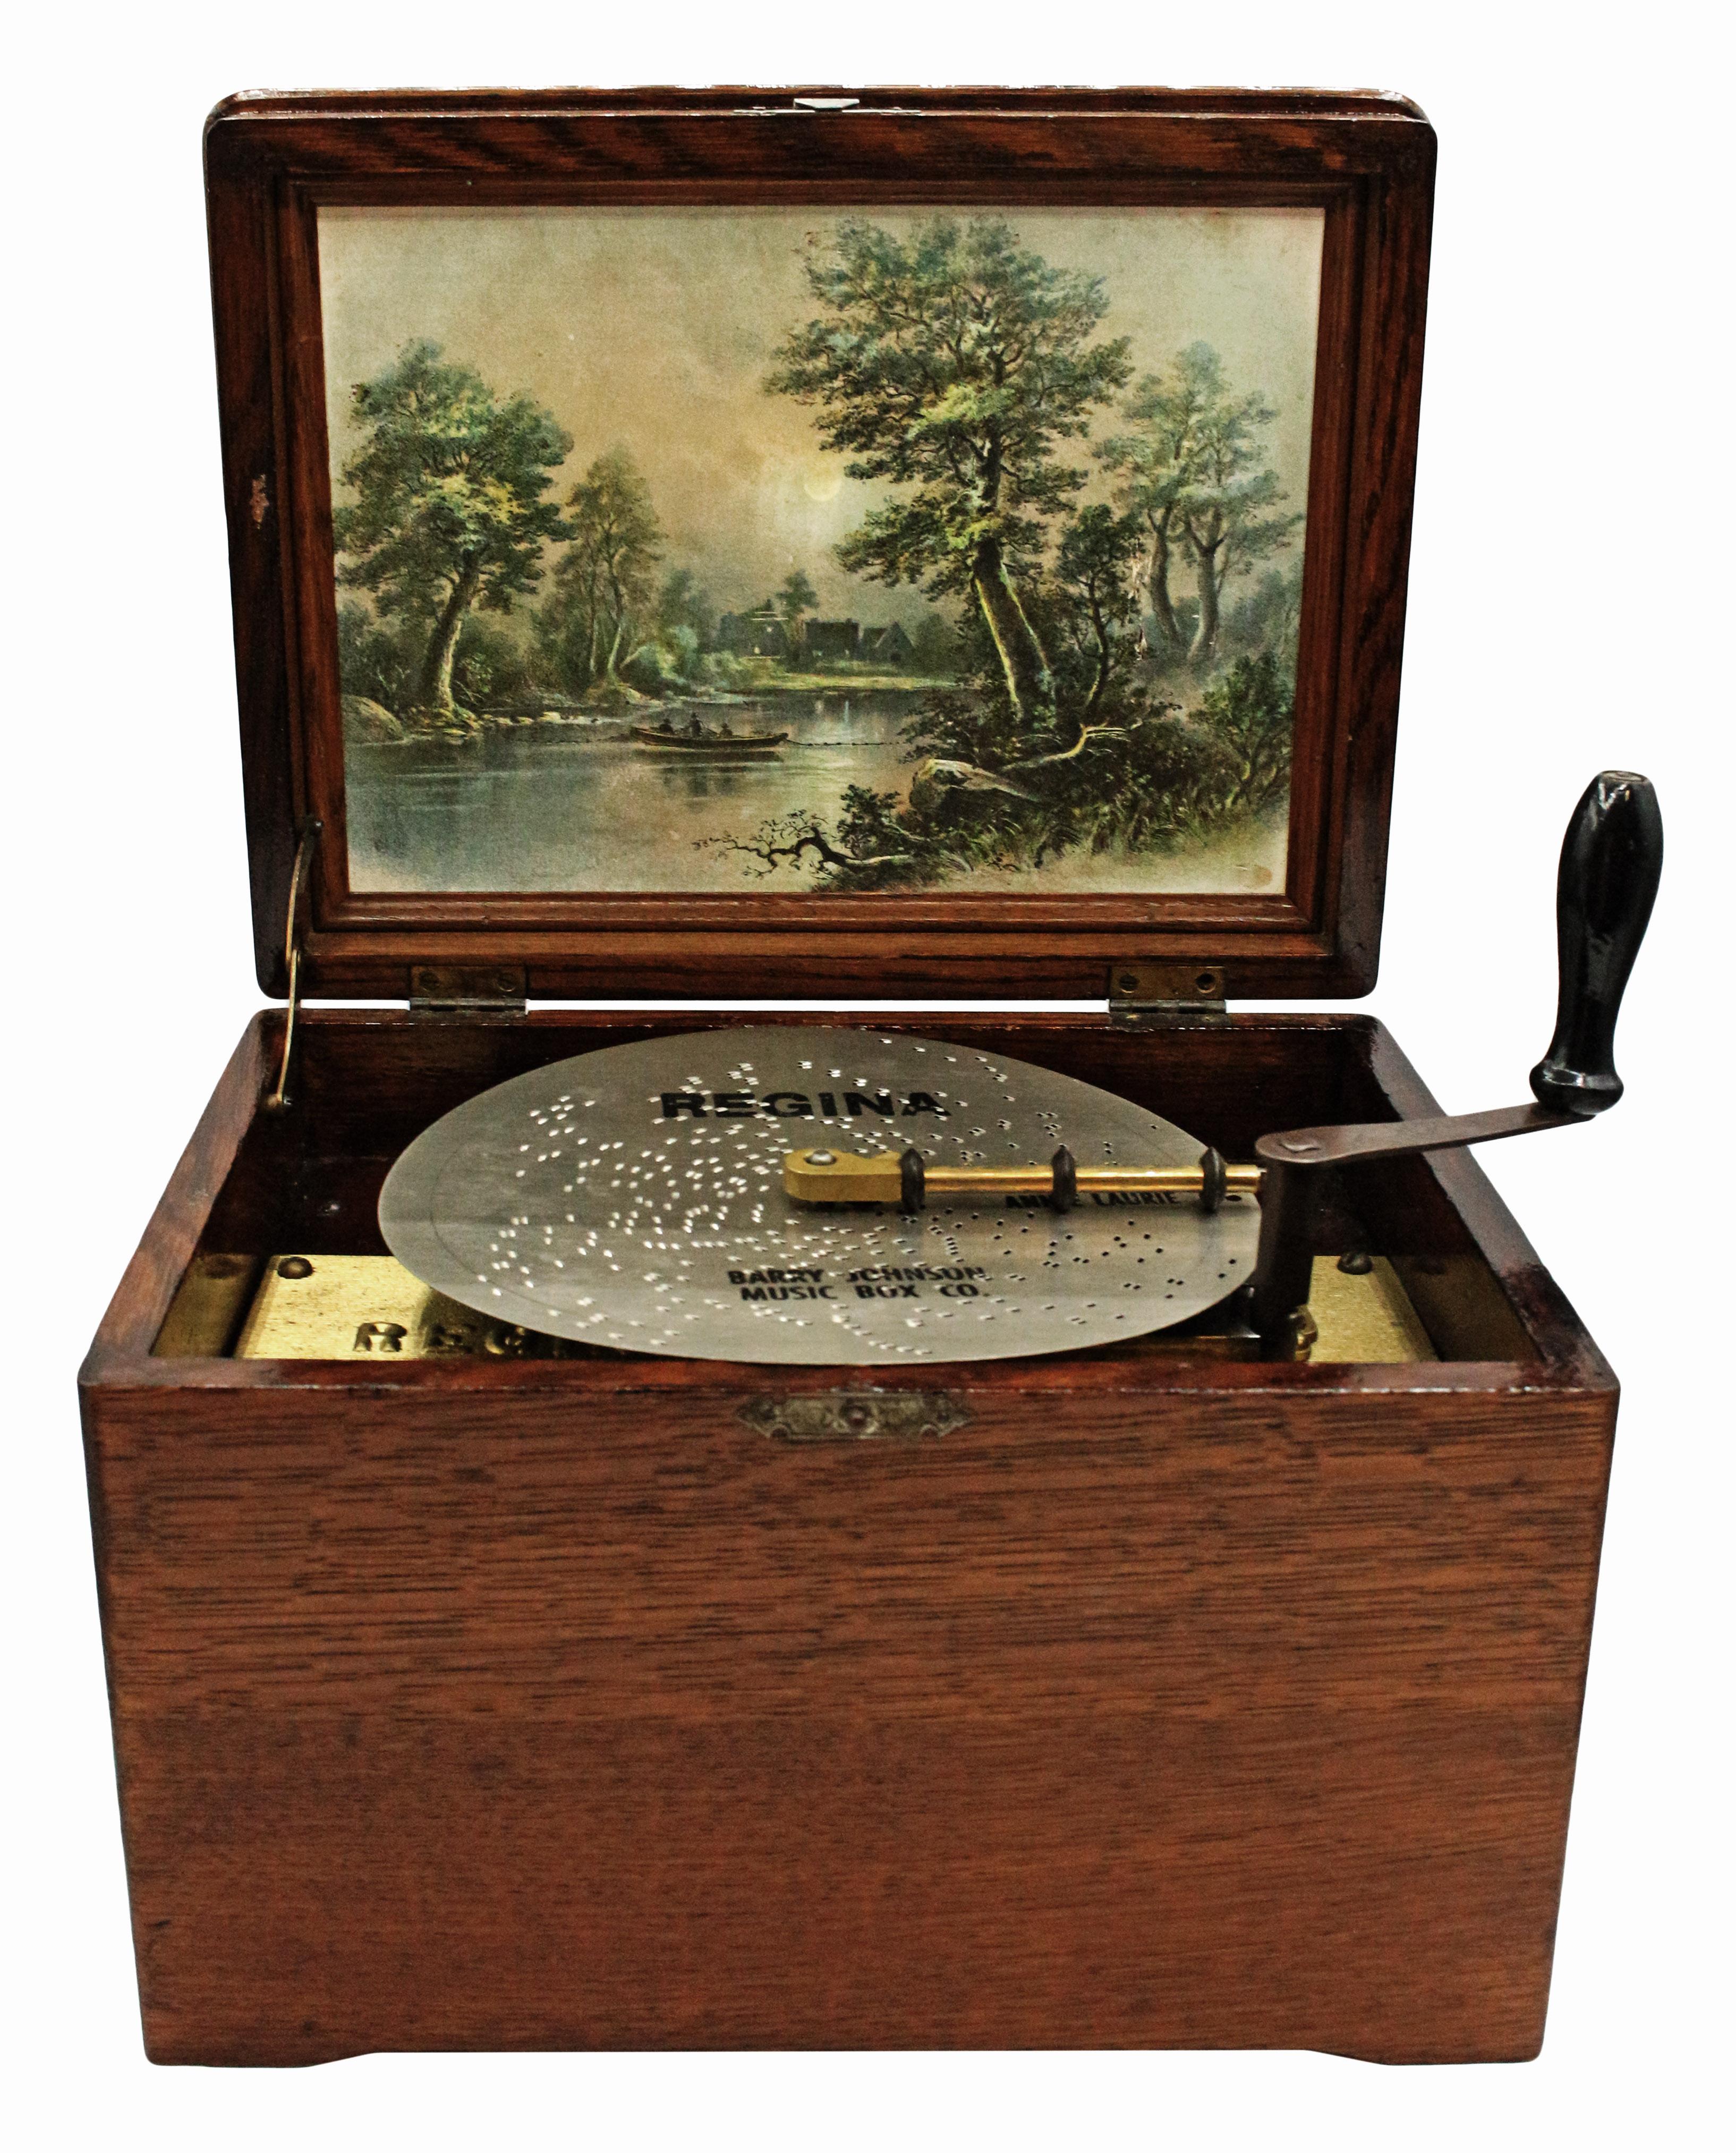 1902 Regina music box with 3 discs and crank. Molded oak case. One additional disc should not be used. 